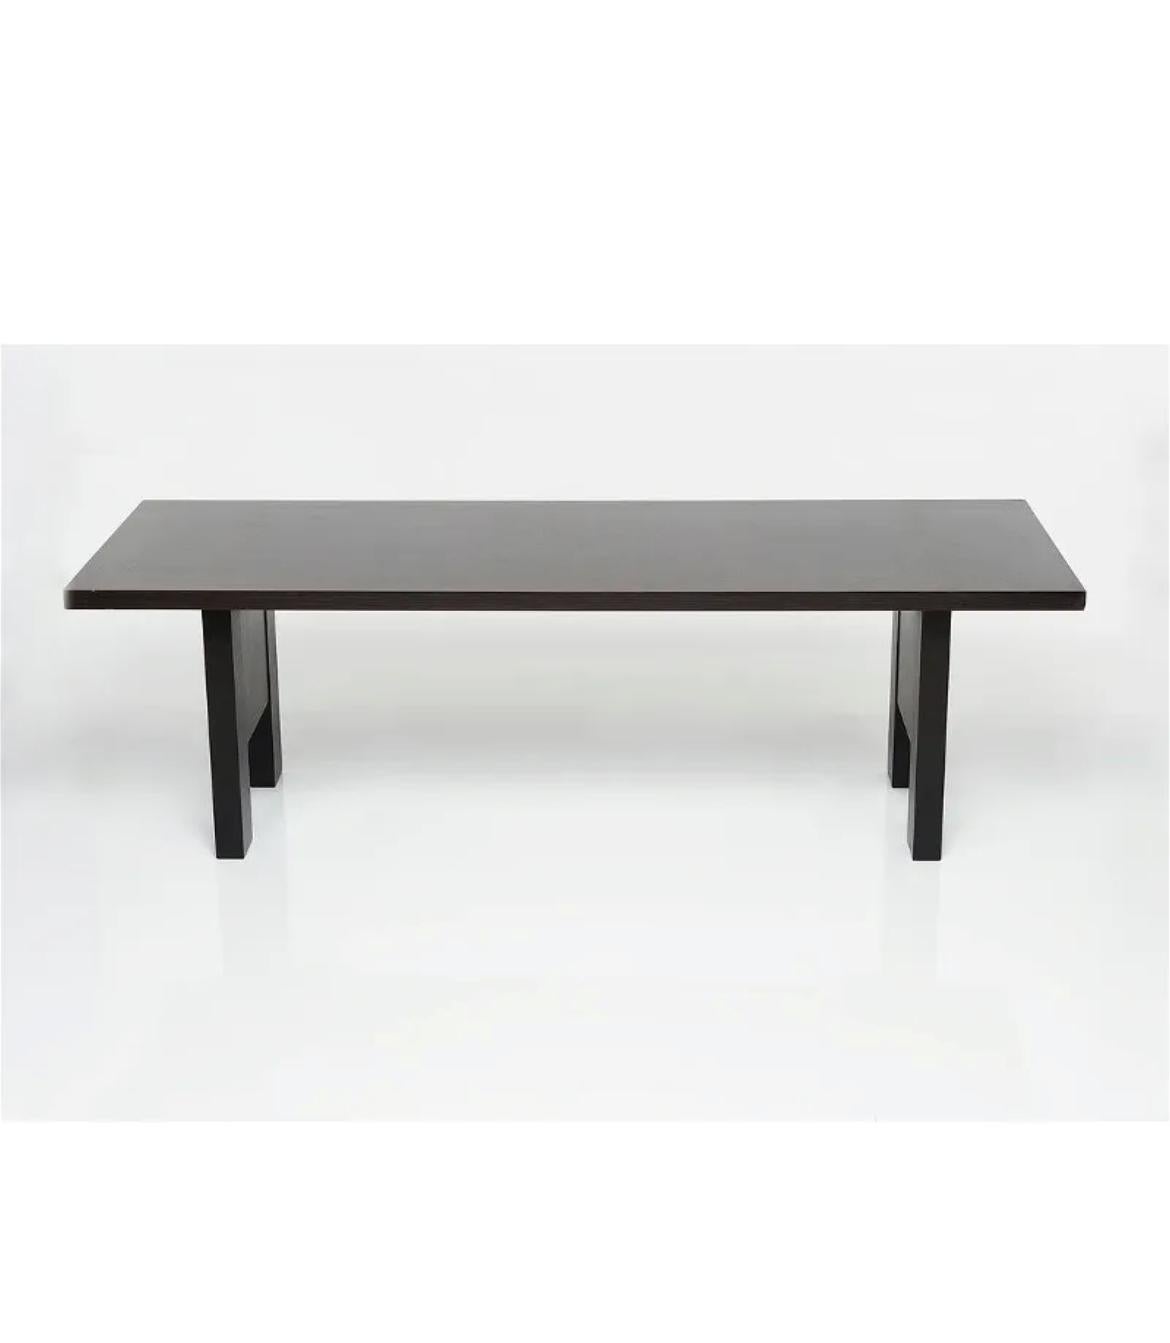 Christian Liaigre
'Abyss' dining table, 2010s

Ebonized oak. Manufactured for Holly Hunt, USA.

29.75